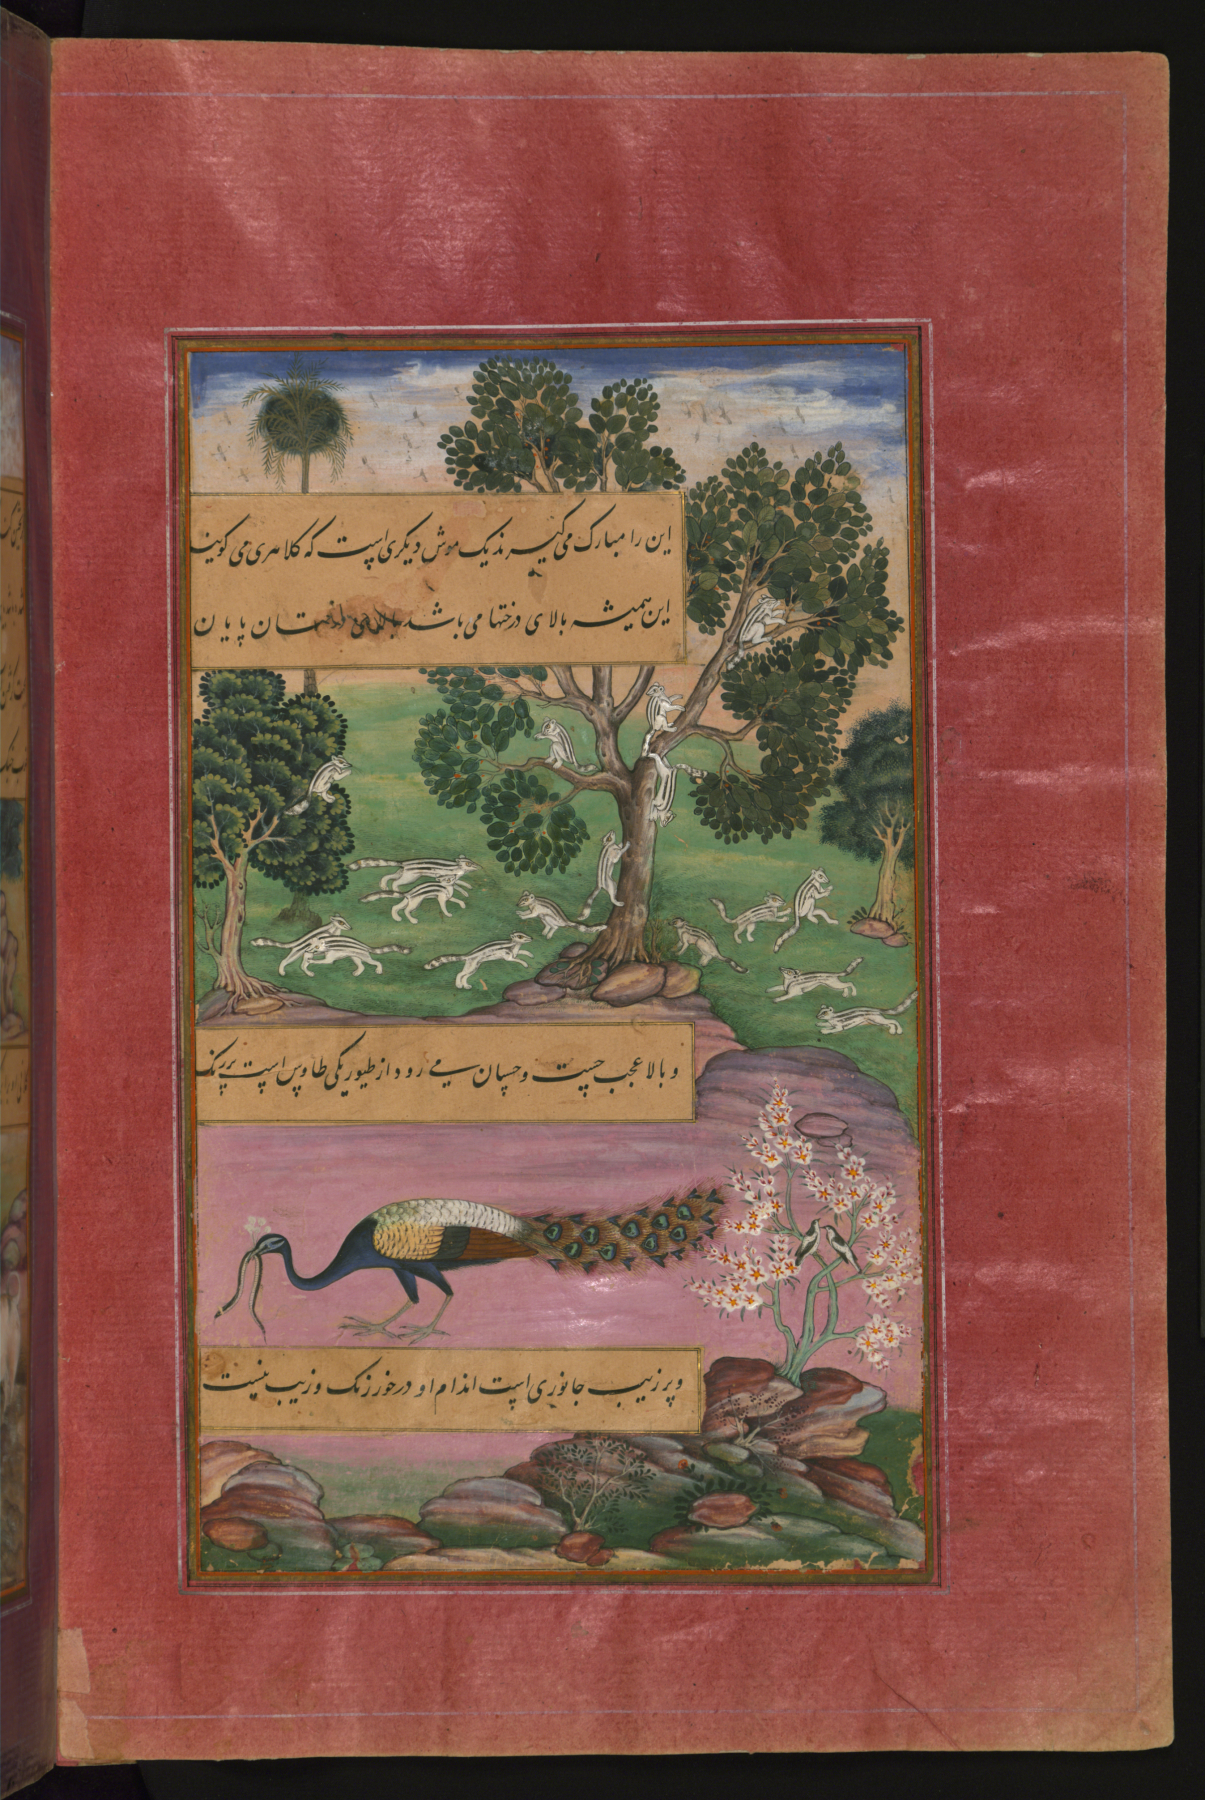 Image for Animals and Birds of Hindustan: Squirrels and Peacock, from the Baburnama (Book of Babur)